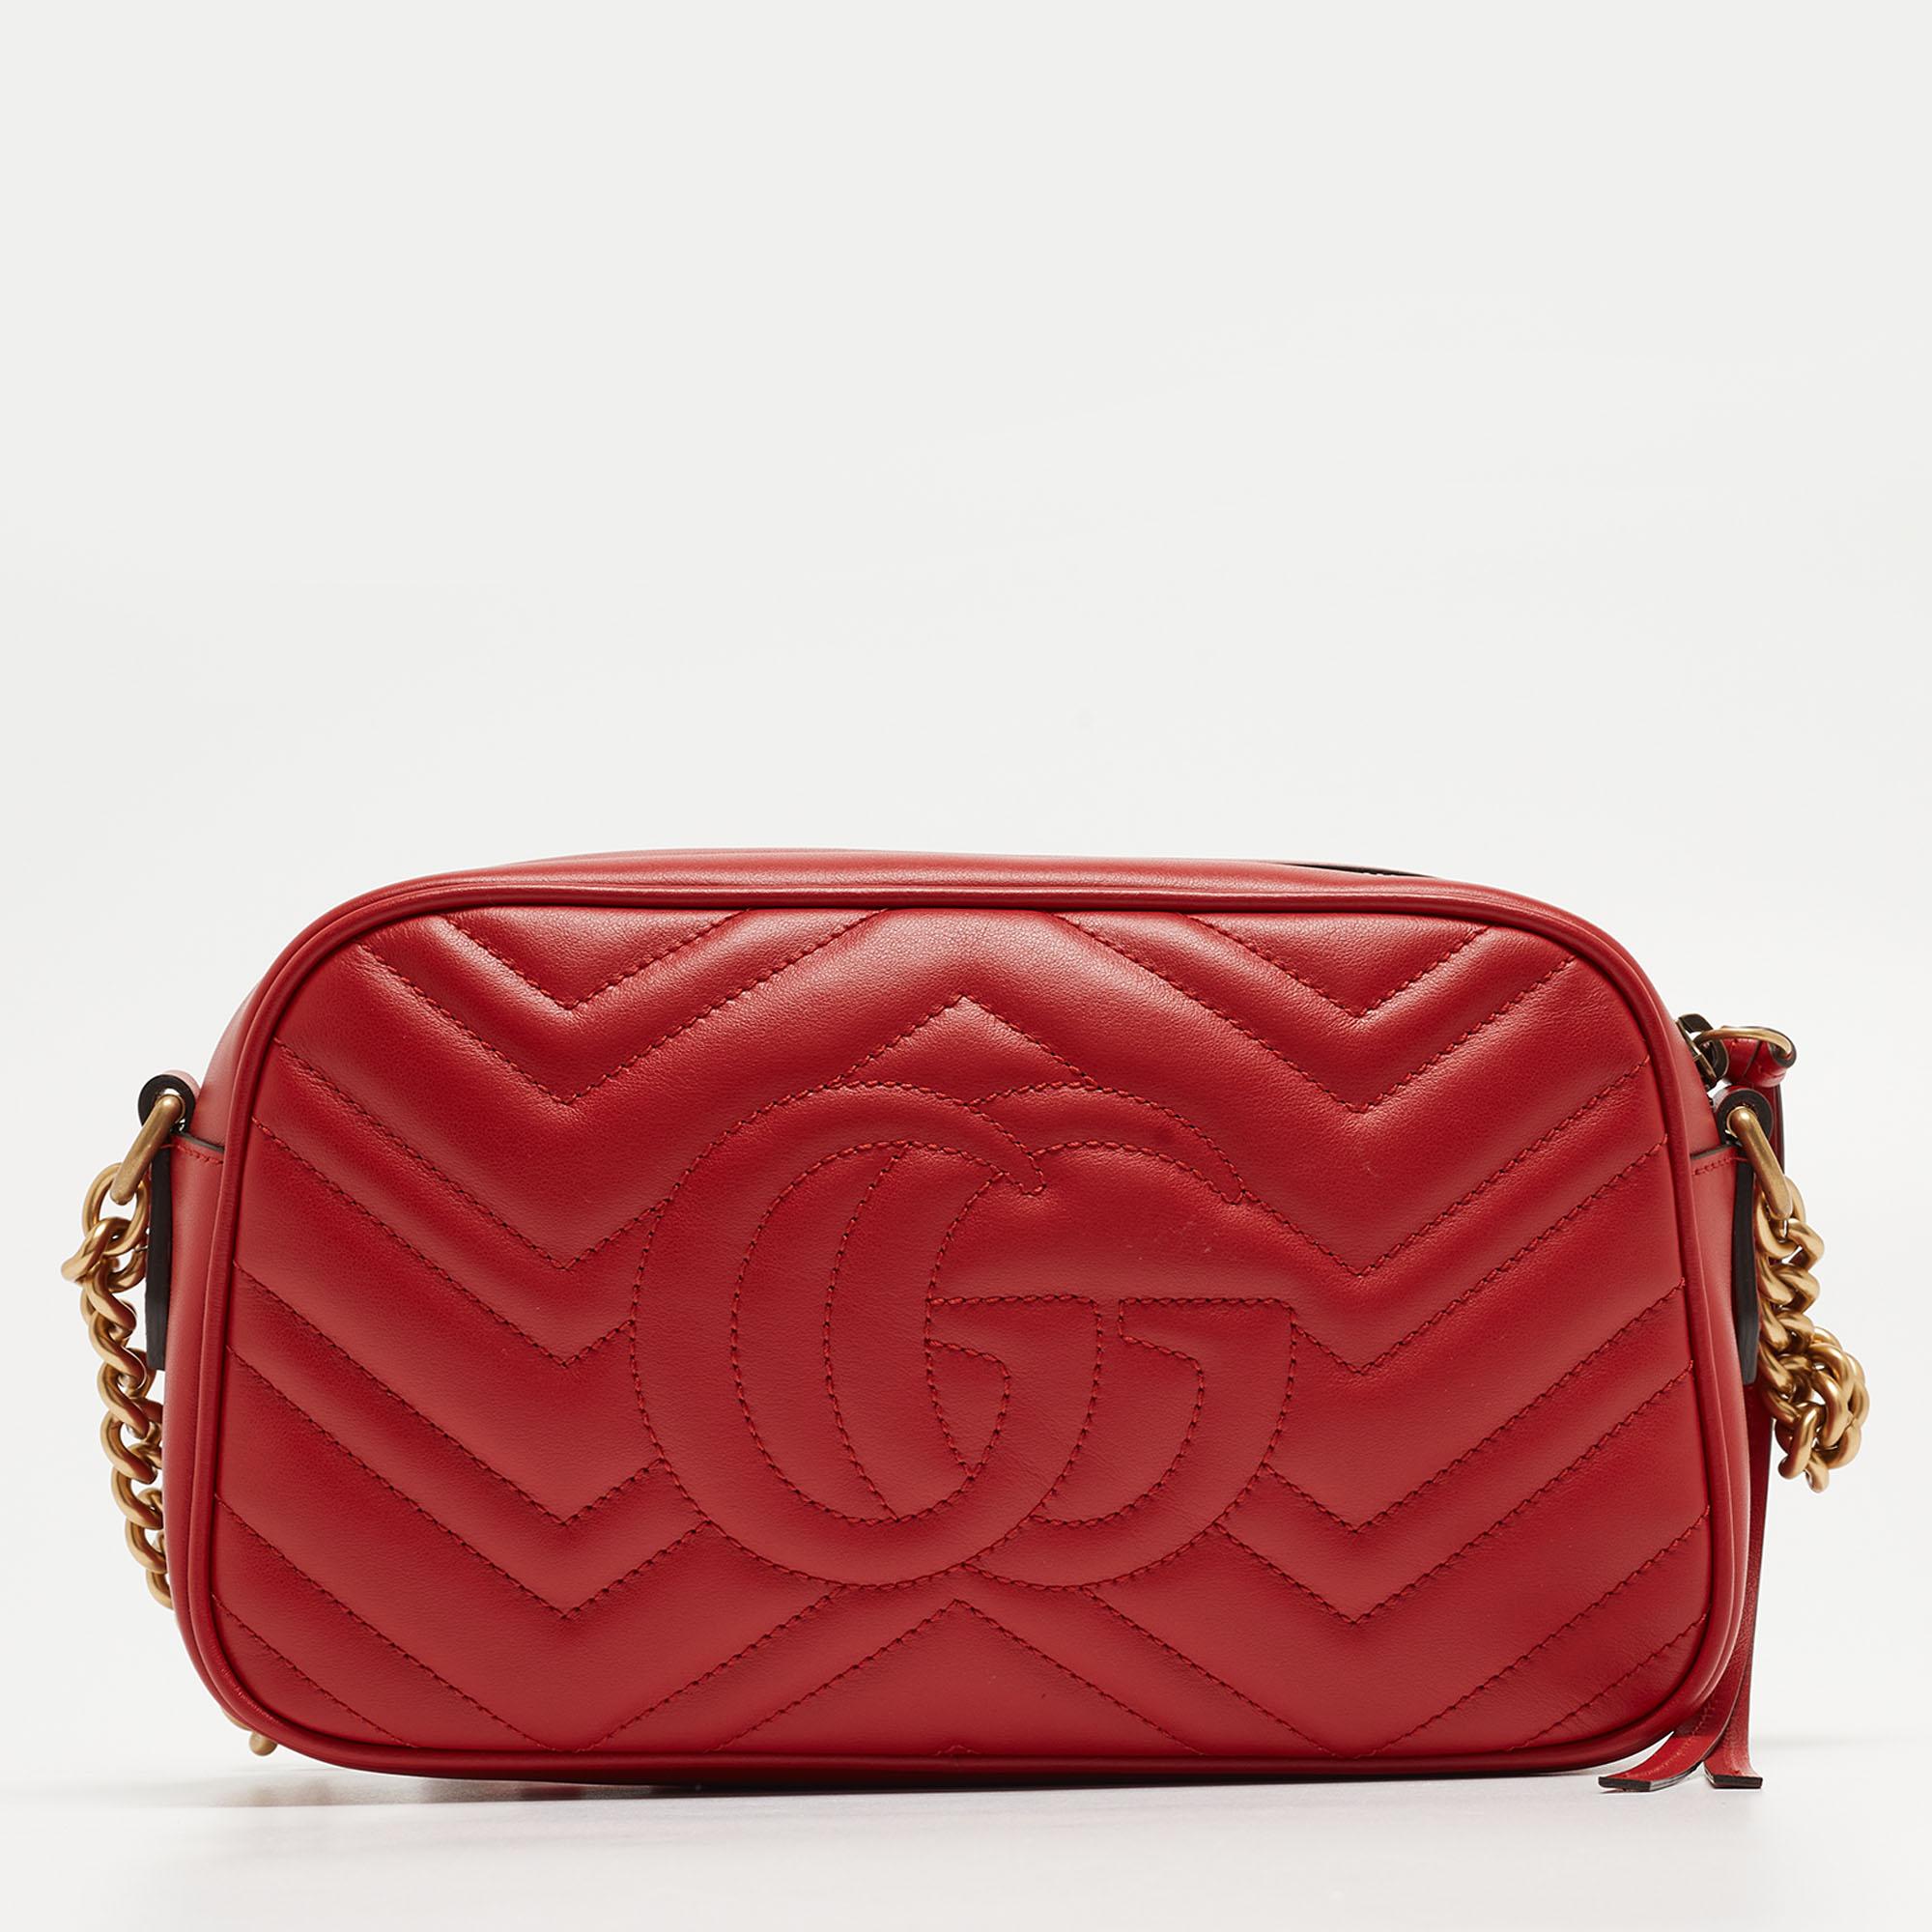 Indulge in luxury with this Gucci GG Marmont bag. Meticulously crafted from premium materials, it combines exquisite design, impeccable craftsmanship, and timeless elegance. Elevate your style with this fashion accessory.

Includes: Original